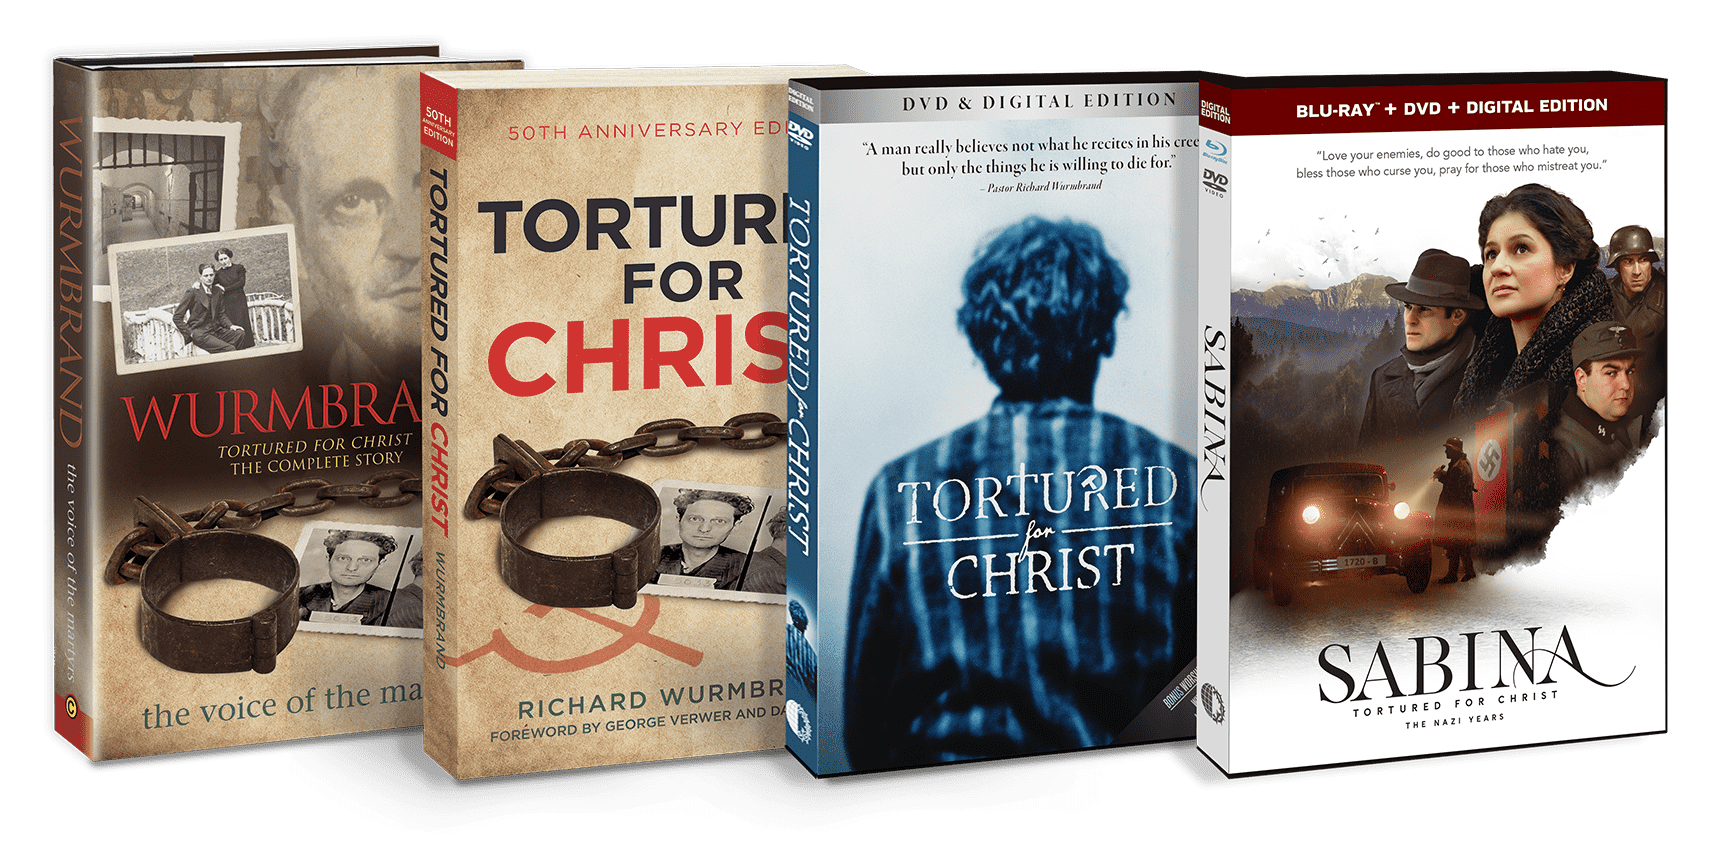 Image of a number of products: Wurmbrand book, Tortured for Christ book, Tortured for Christ DVD and Sabina DVD.